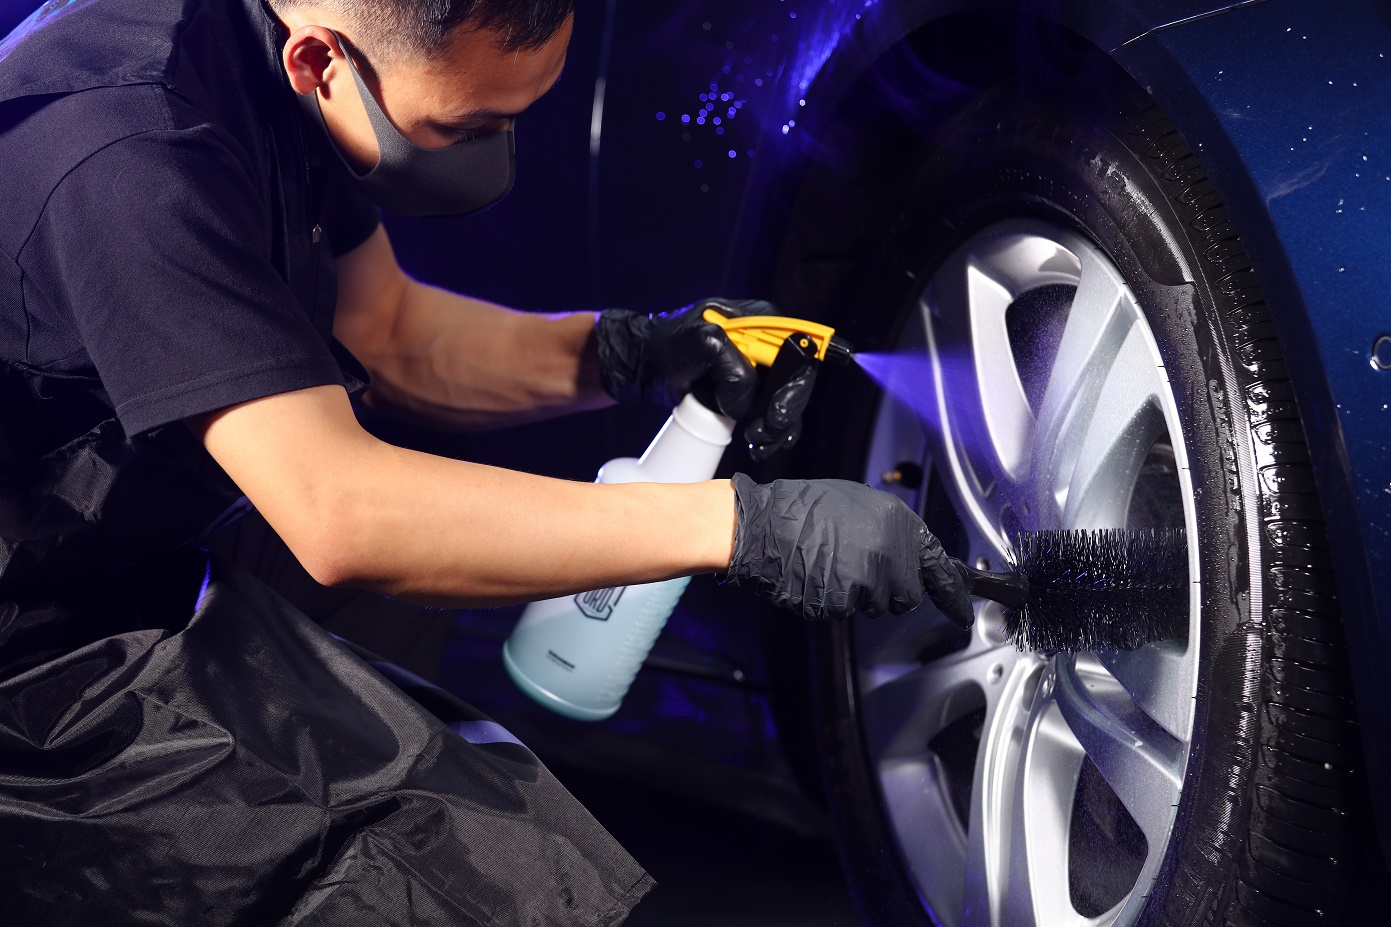 How about the Surainbow tire Polishing Protection Wax?